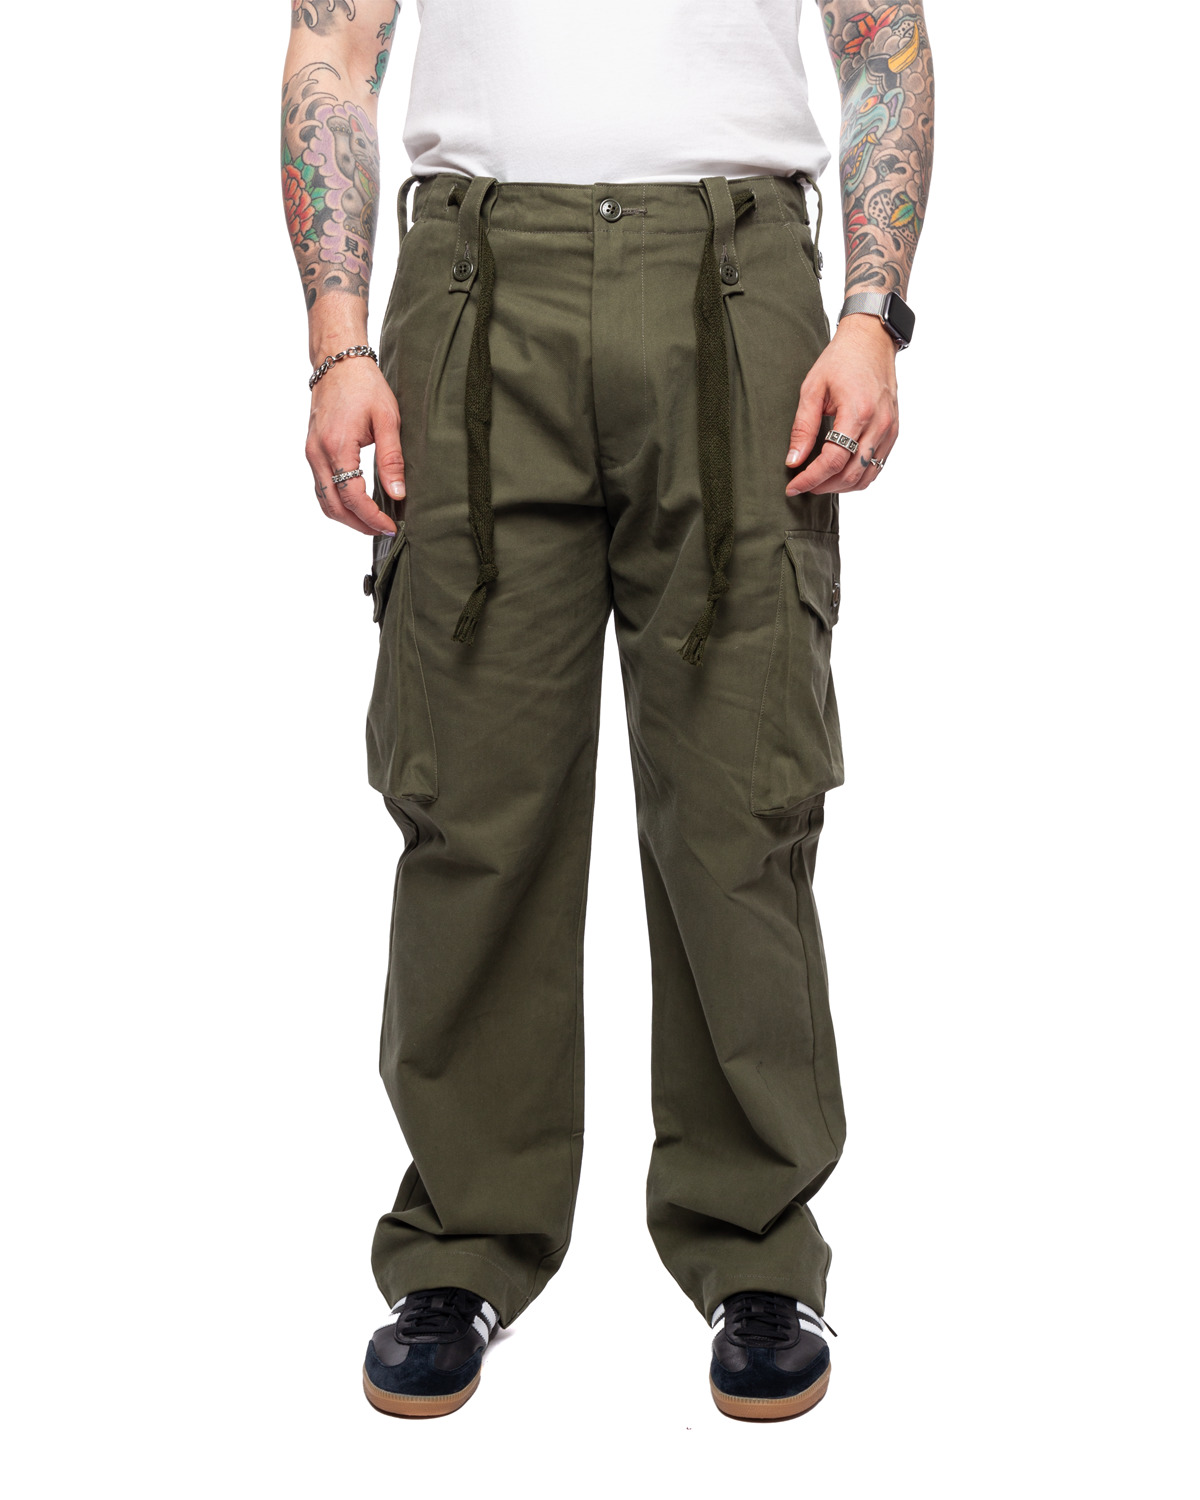 MILT2001/Trousers/Cotton. Twill Olive Drab - 1